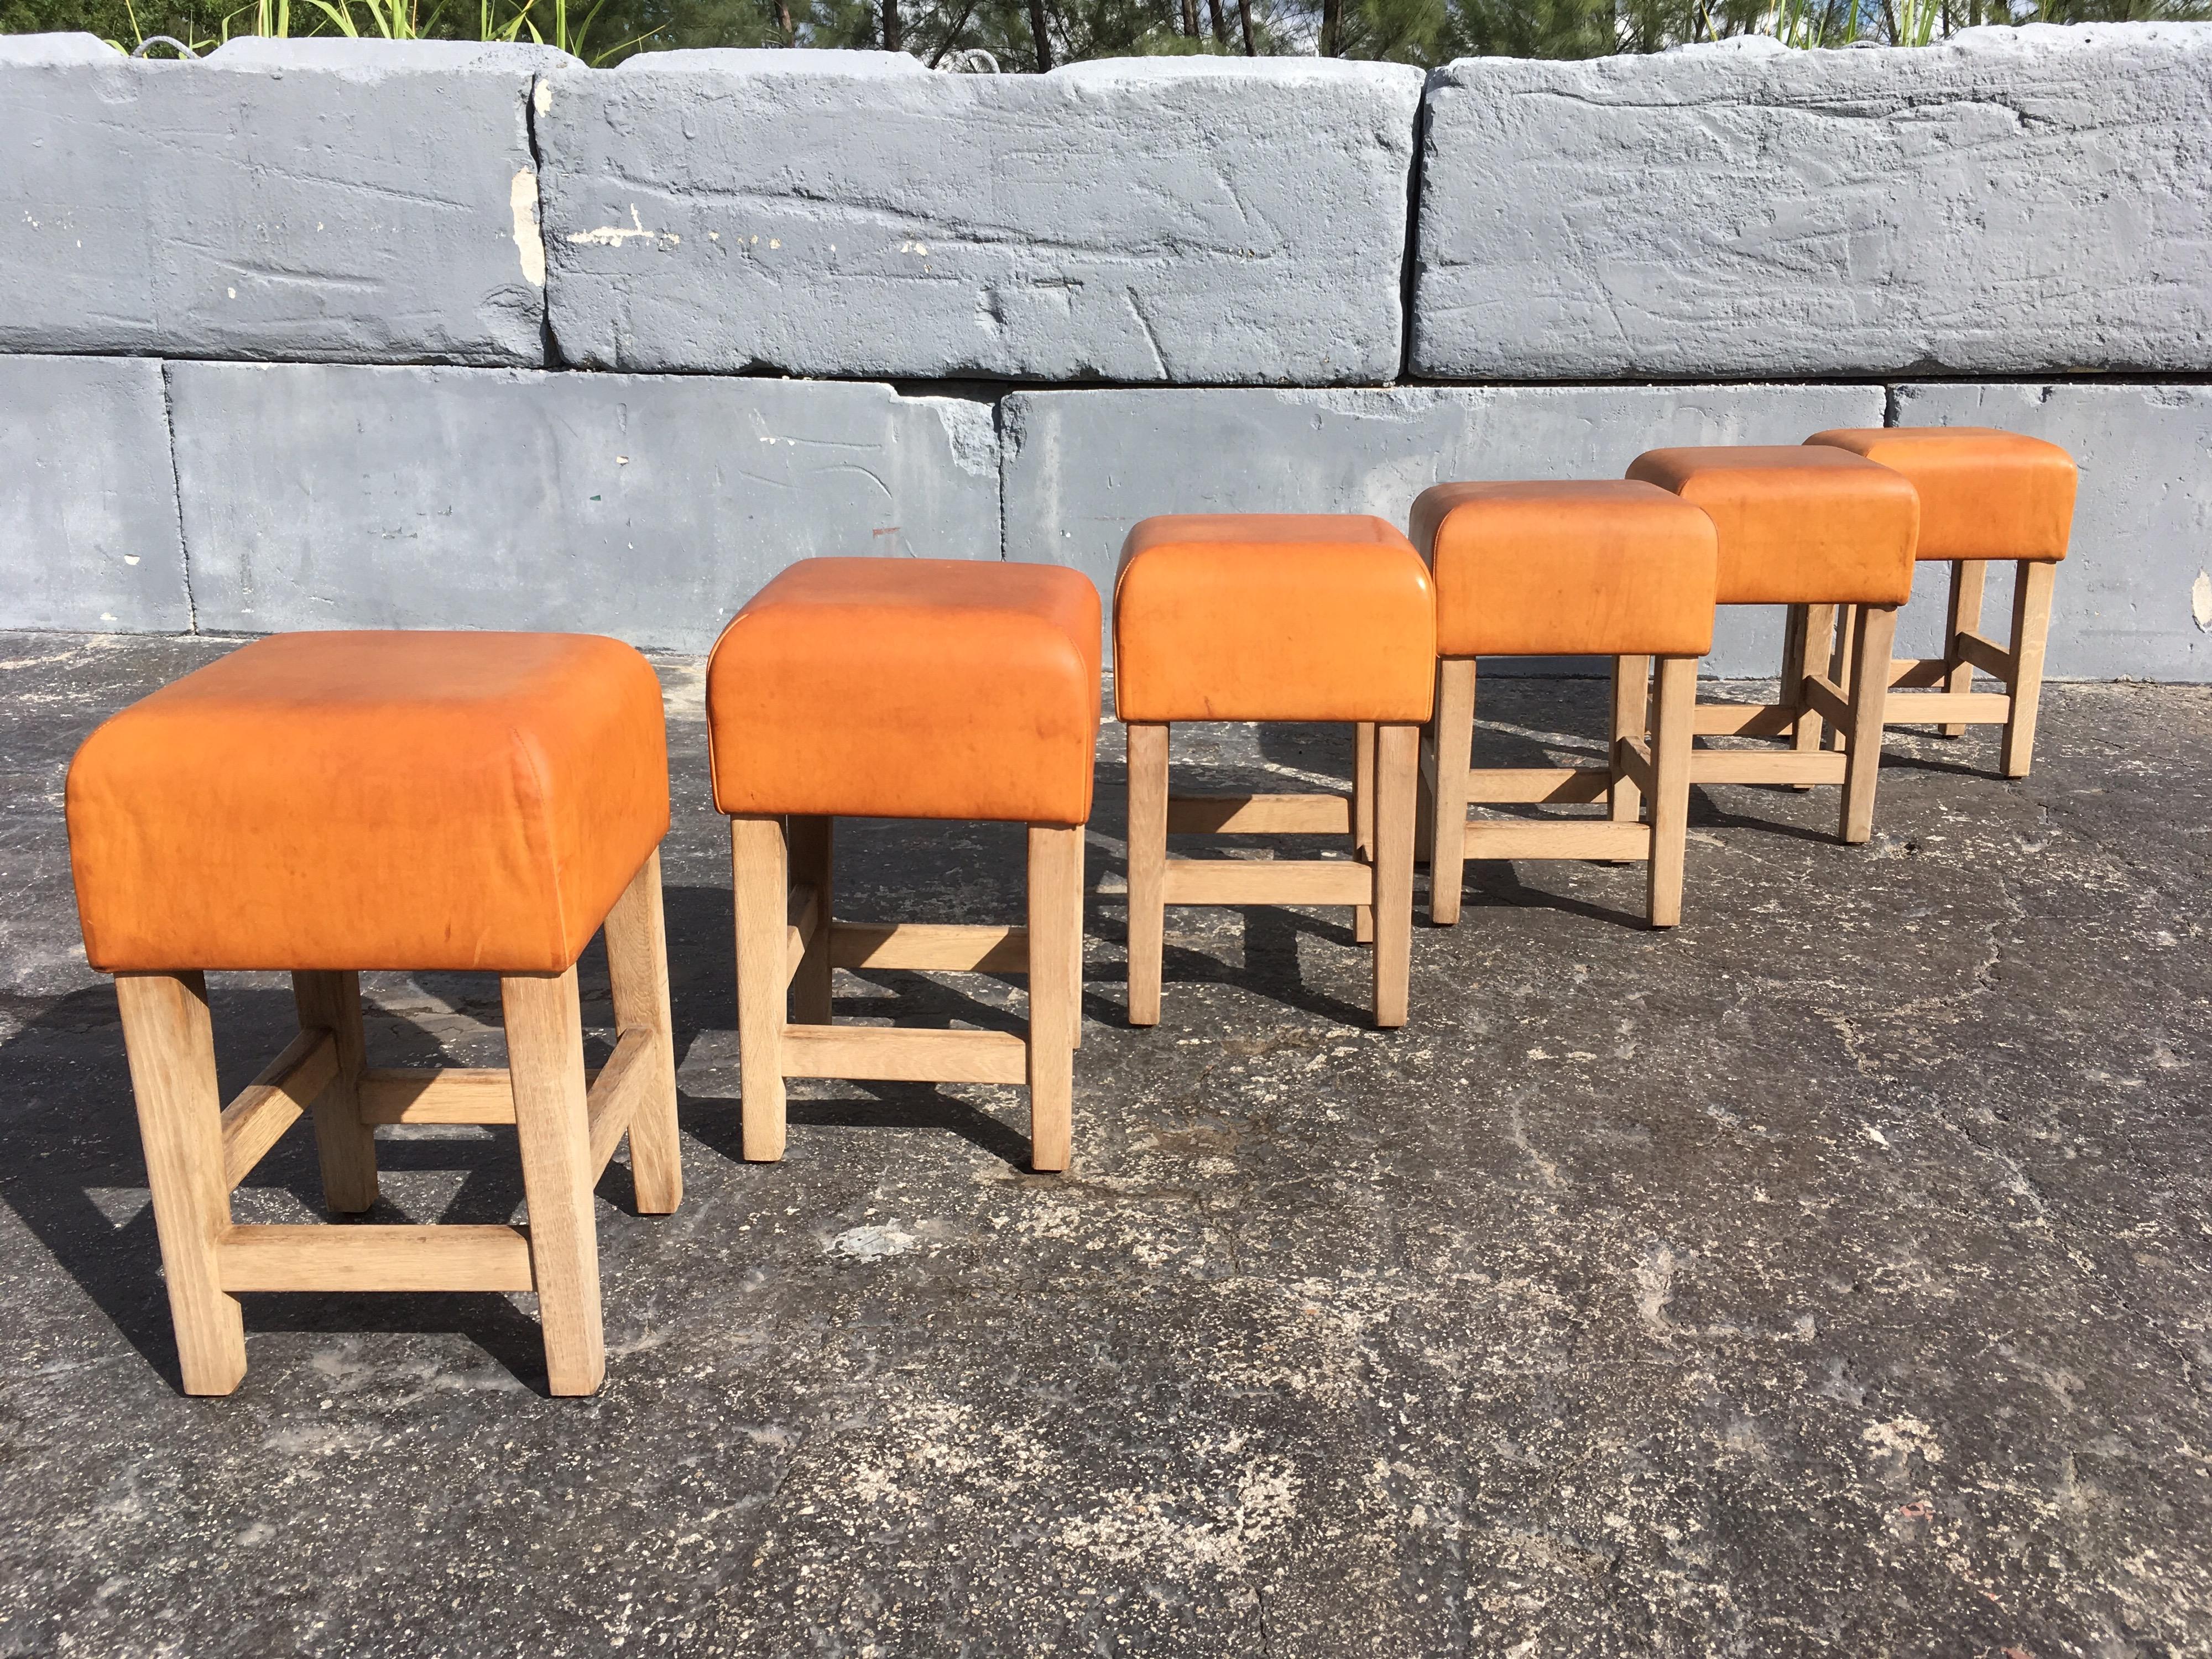 Beautiful and extremely well made stools or chairs, solid oak and beautiful cognac leather with a great patina.
The leather is very thick and the oak construction will last forever.